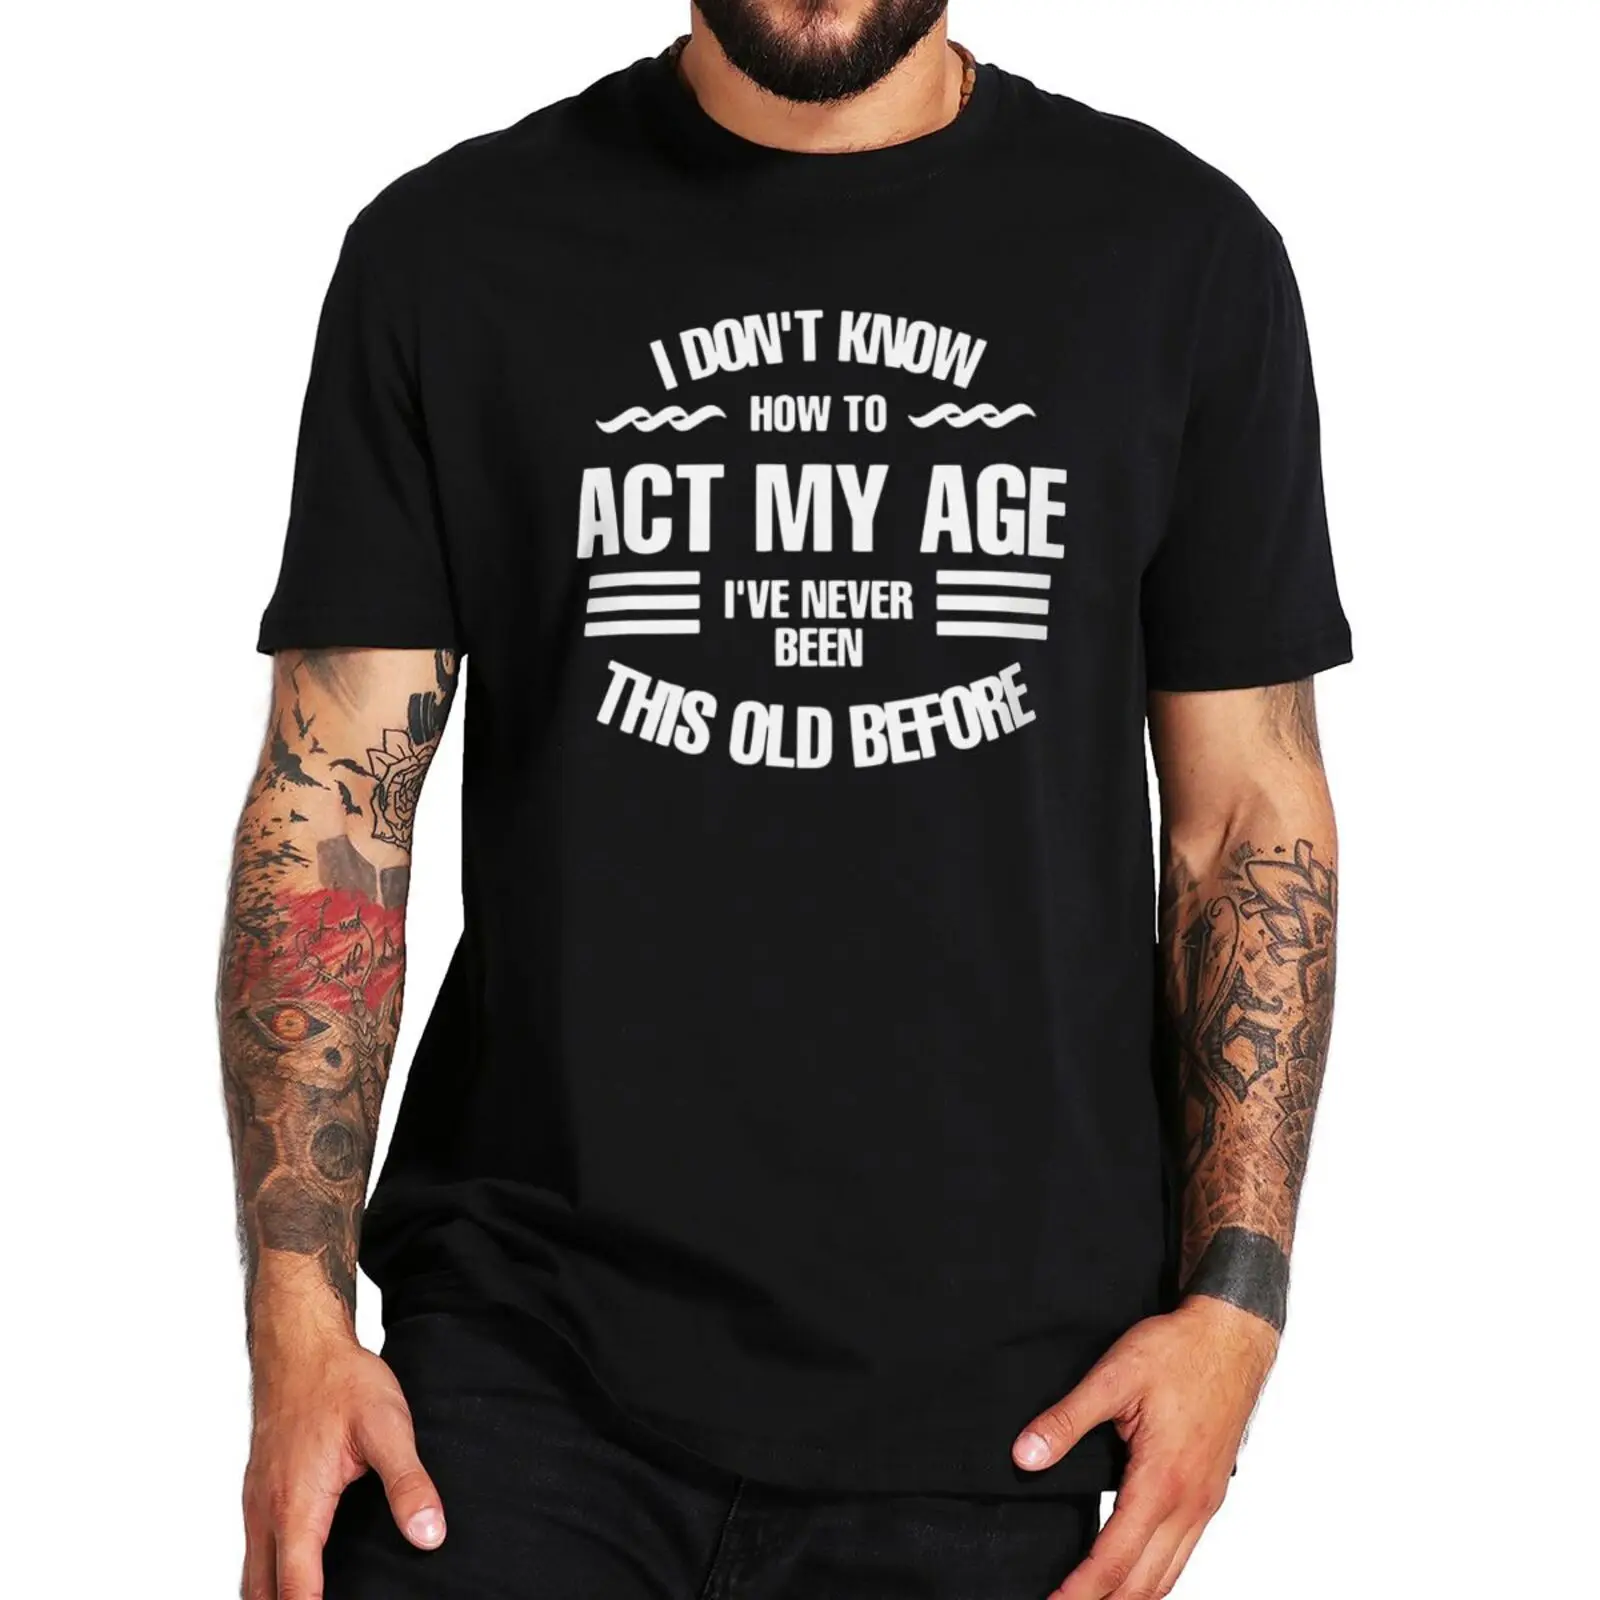 

I Don't Know How To Act My Age T Shirt I've Never Been This Old Before Funny Quote Design Tshirt For Unisex Casual Camiseta